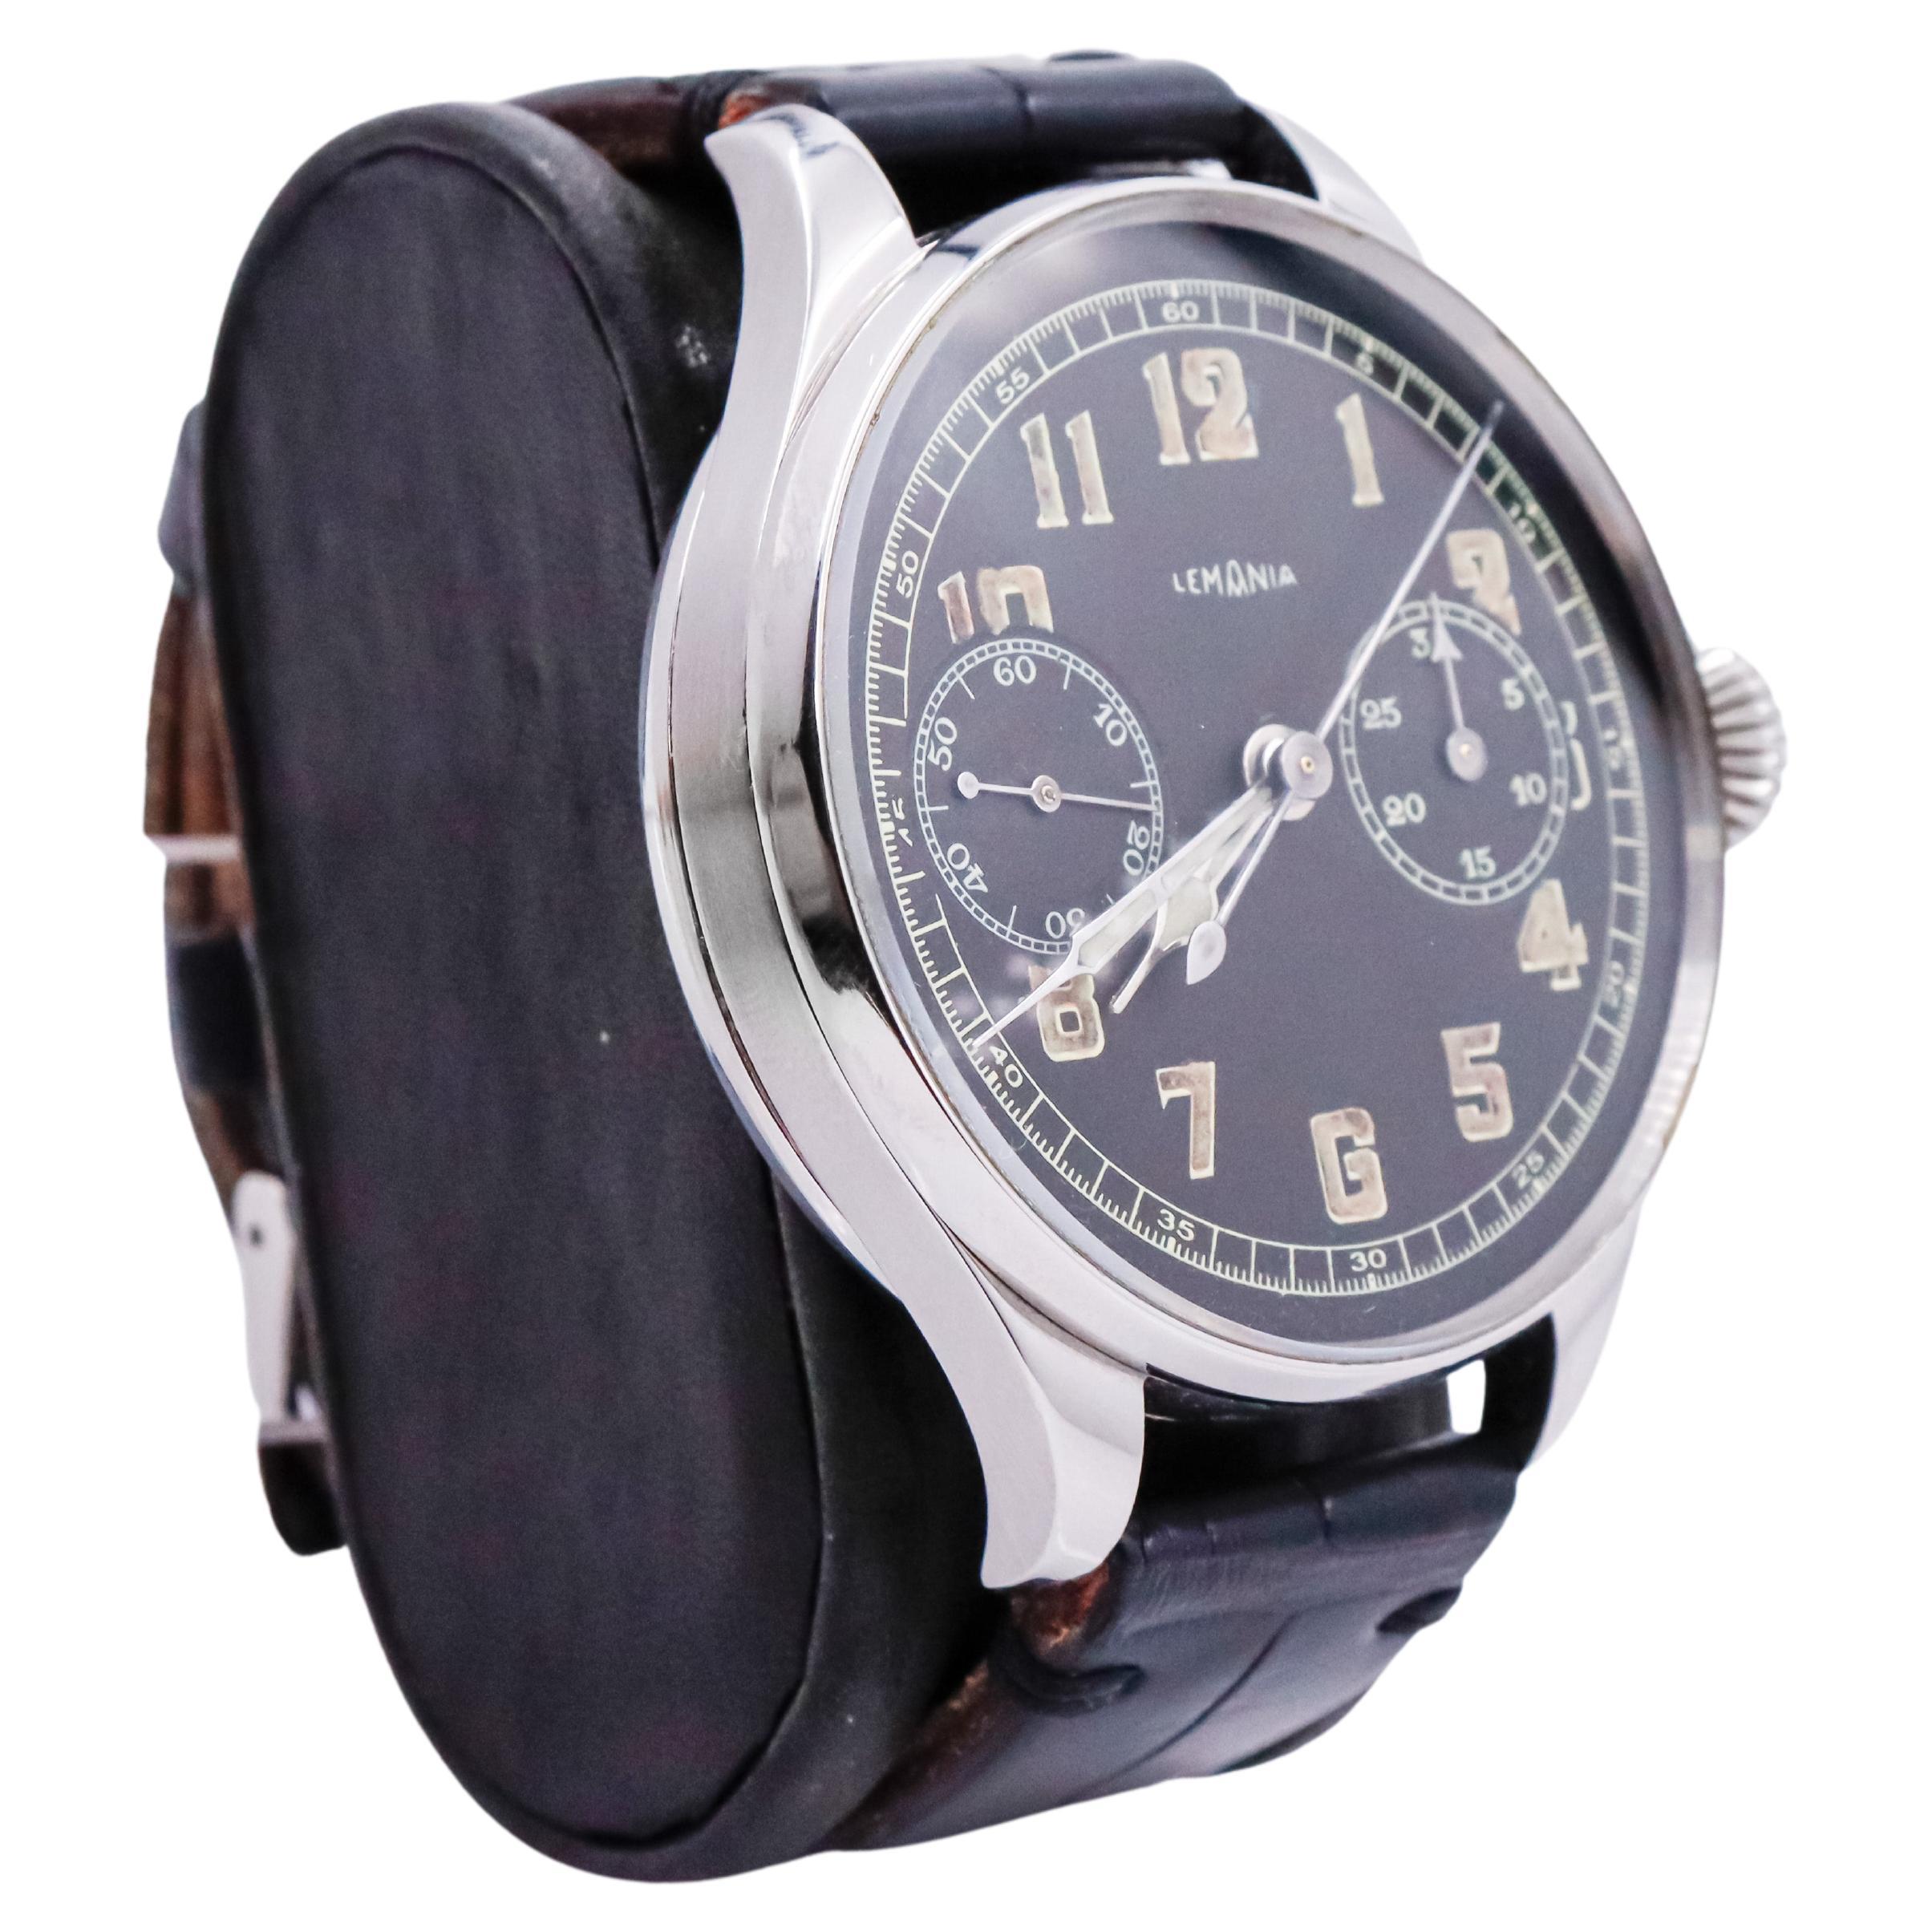 FACTORY / HOUSE: Lemania Watch Company
STYLE / REFERENCE: Oversized Chronograph with Exhibition Back 
METAL / MATERIAL: Stainless Steel
CIRCA / YEAR: 1910's
DIMENSIONS / SIZE: Length 56mm X Diameter 46mm 
MOVEMENT / CALIBER: Manual Winding / 17